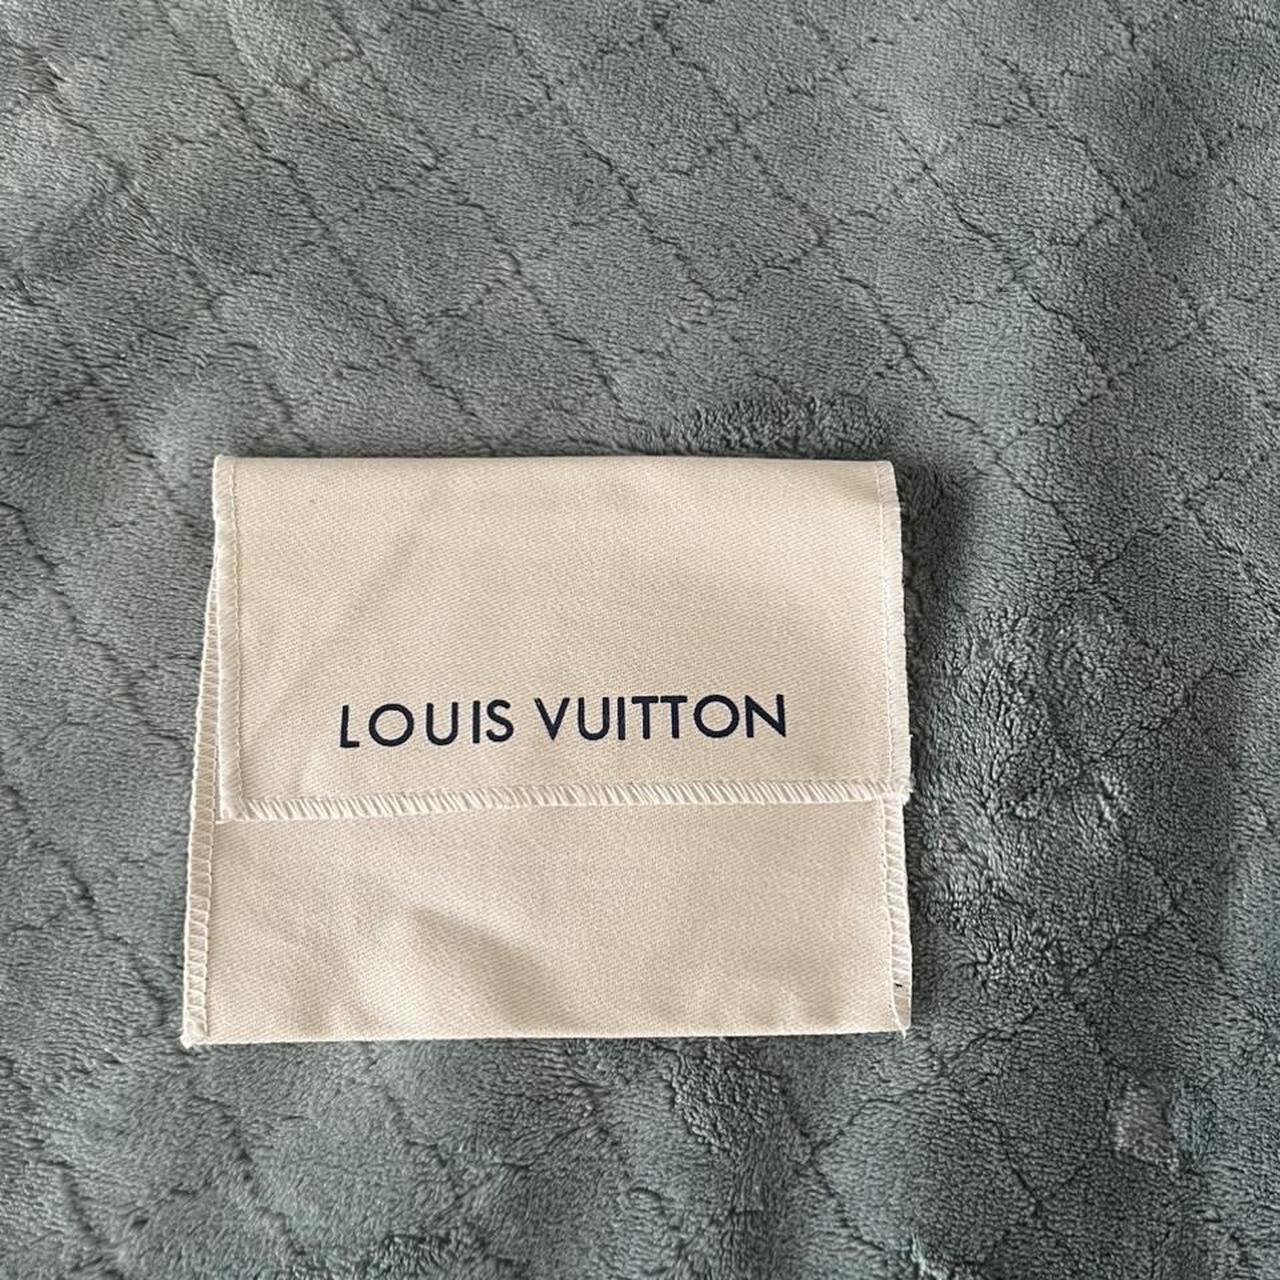 Louis Vuitton small wallet dust bag, In perfect